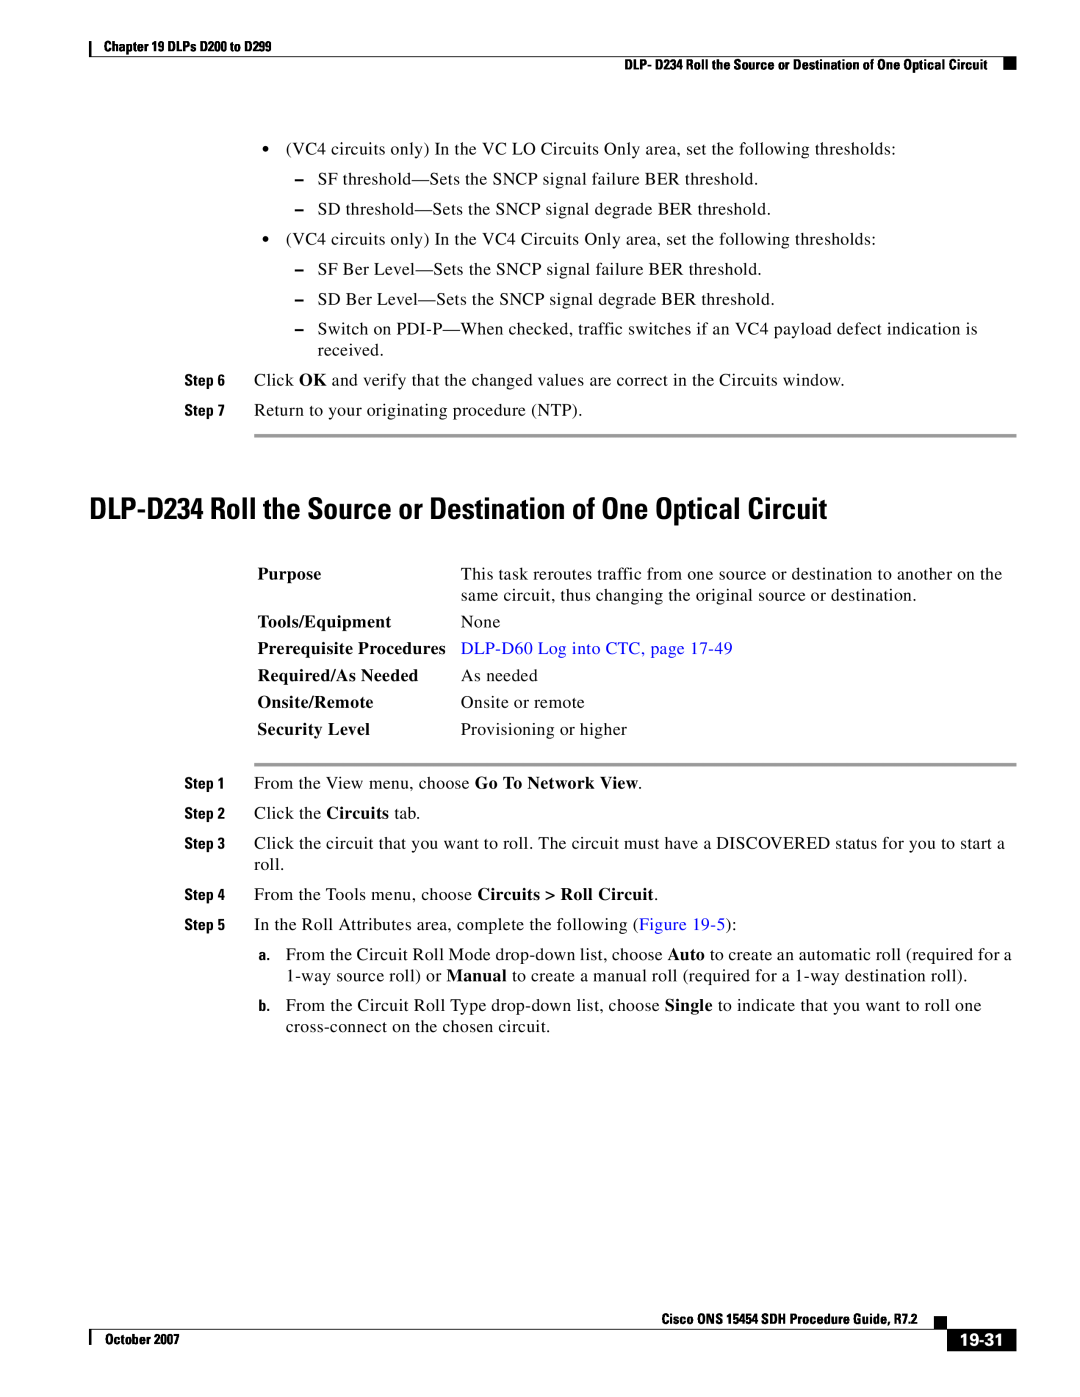 Cisco Systems D200 manual DLP-D234 Roll the Source or Destination of One Optical Circuit, 19-31, Purpose, Tools/Equipment 